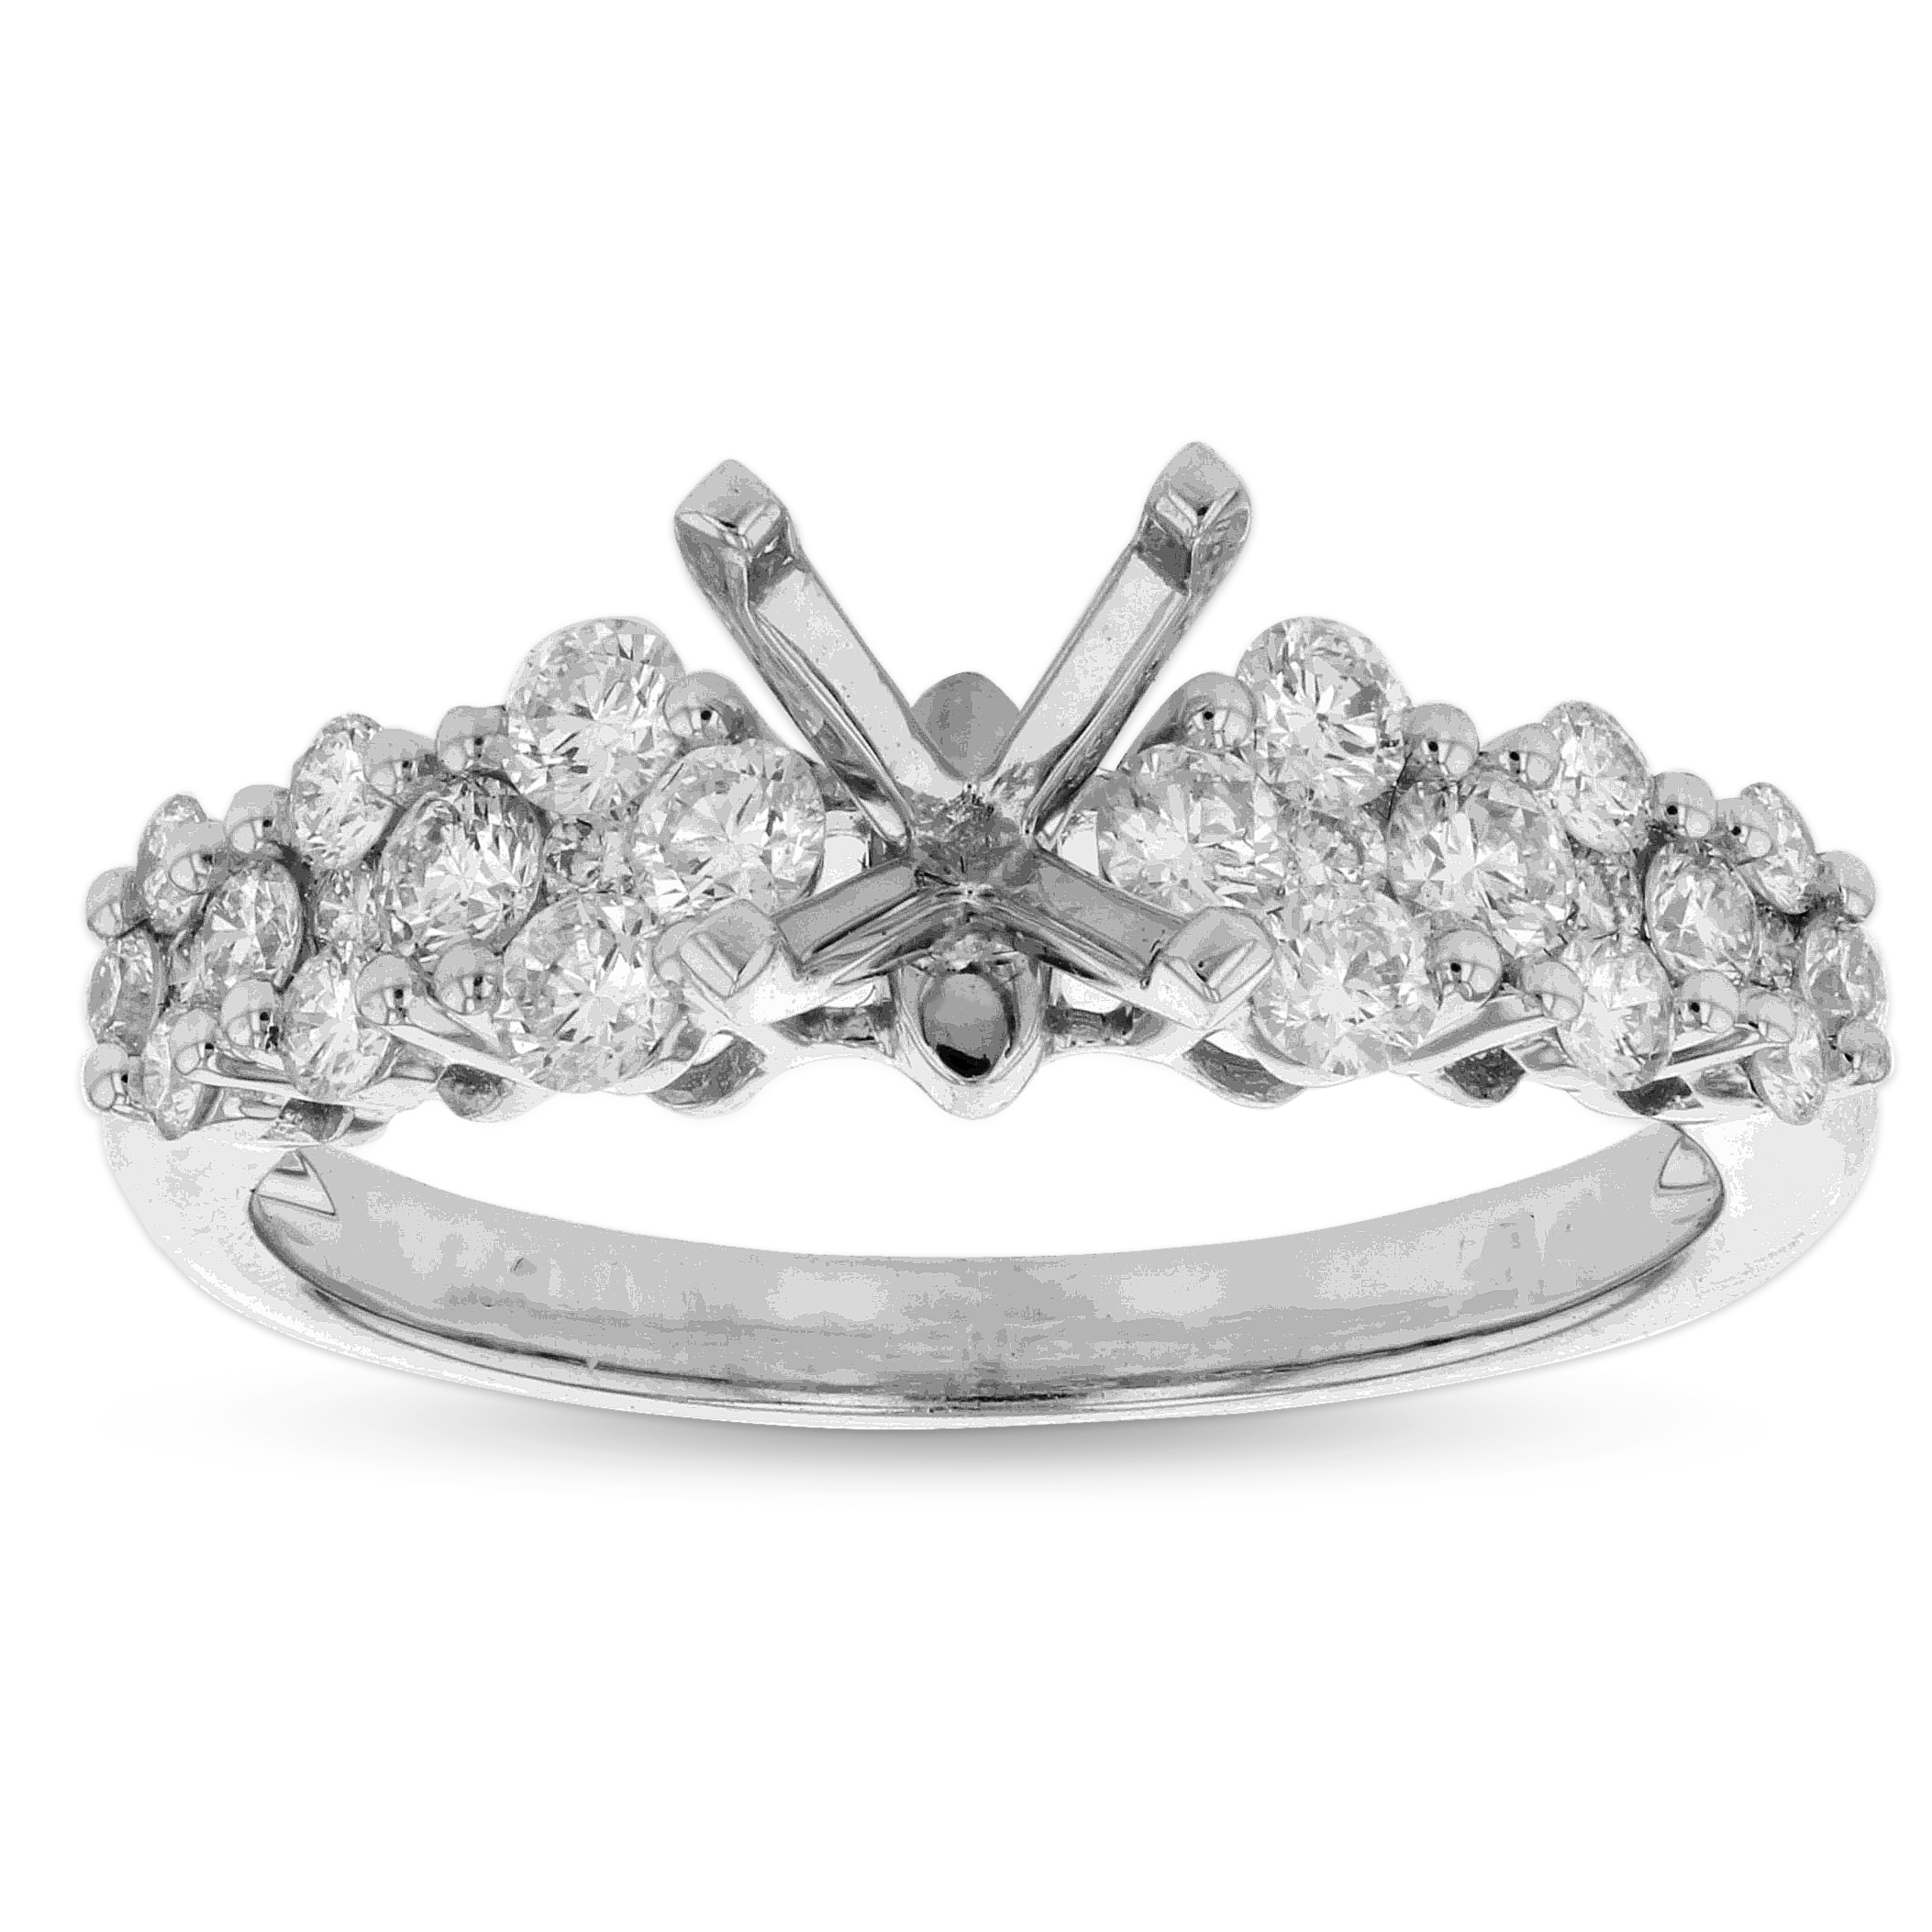 View 0.70ctw Diamond Semi Mount Engagement Ring in 18k White Gold